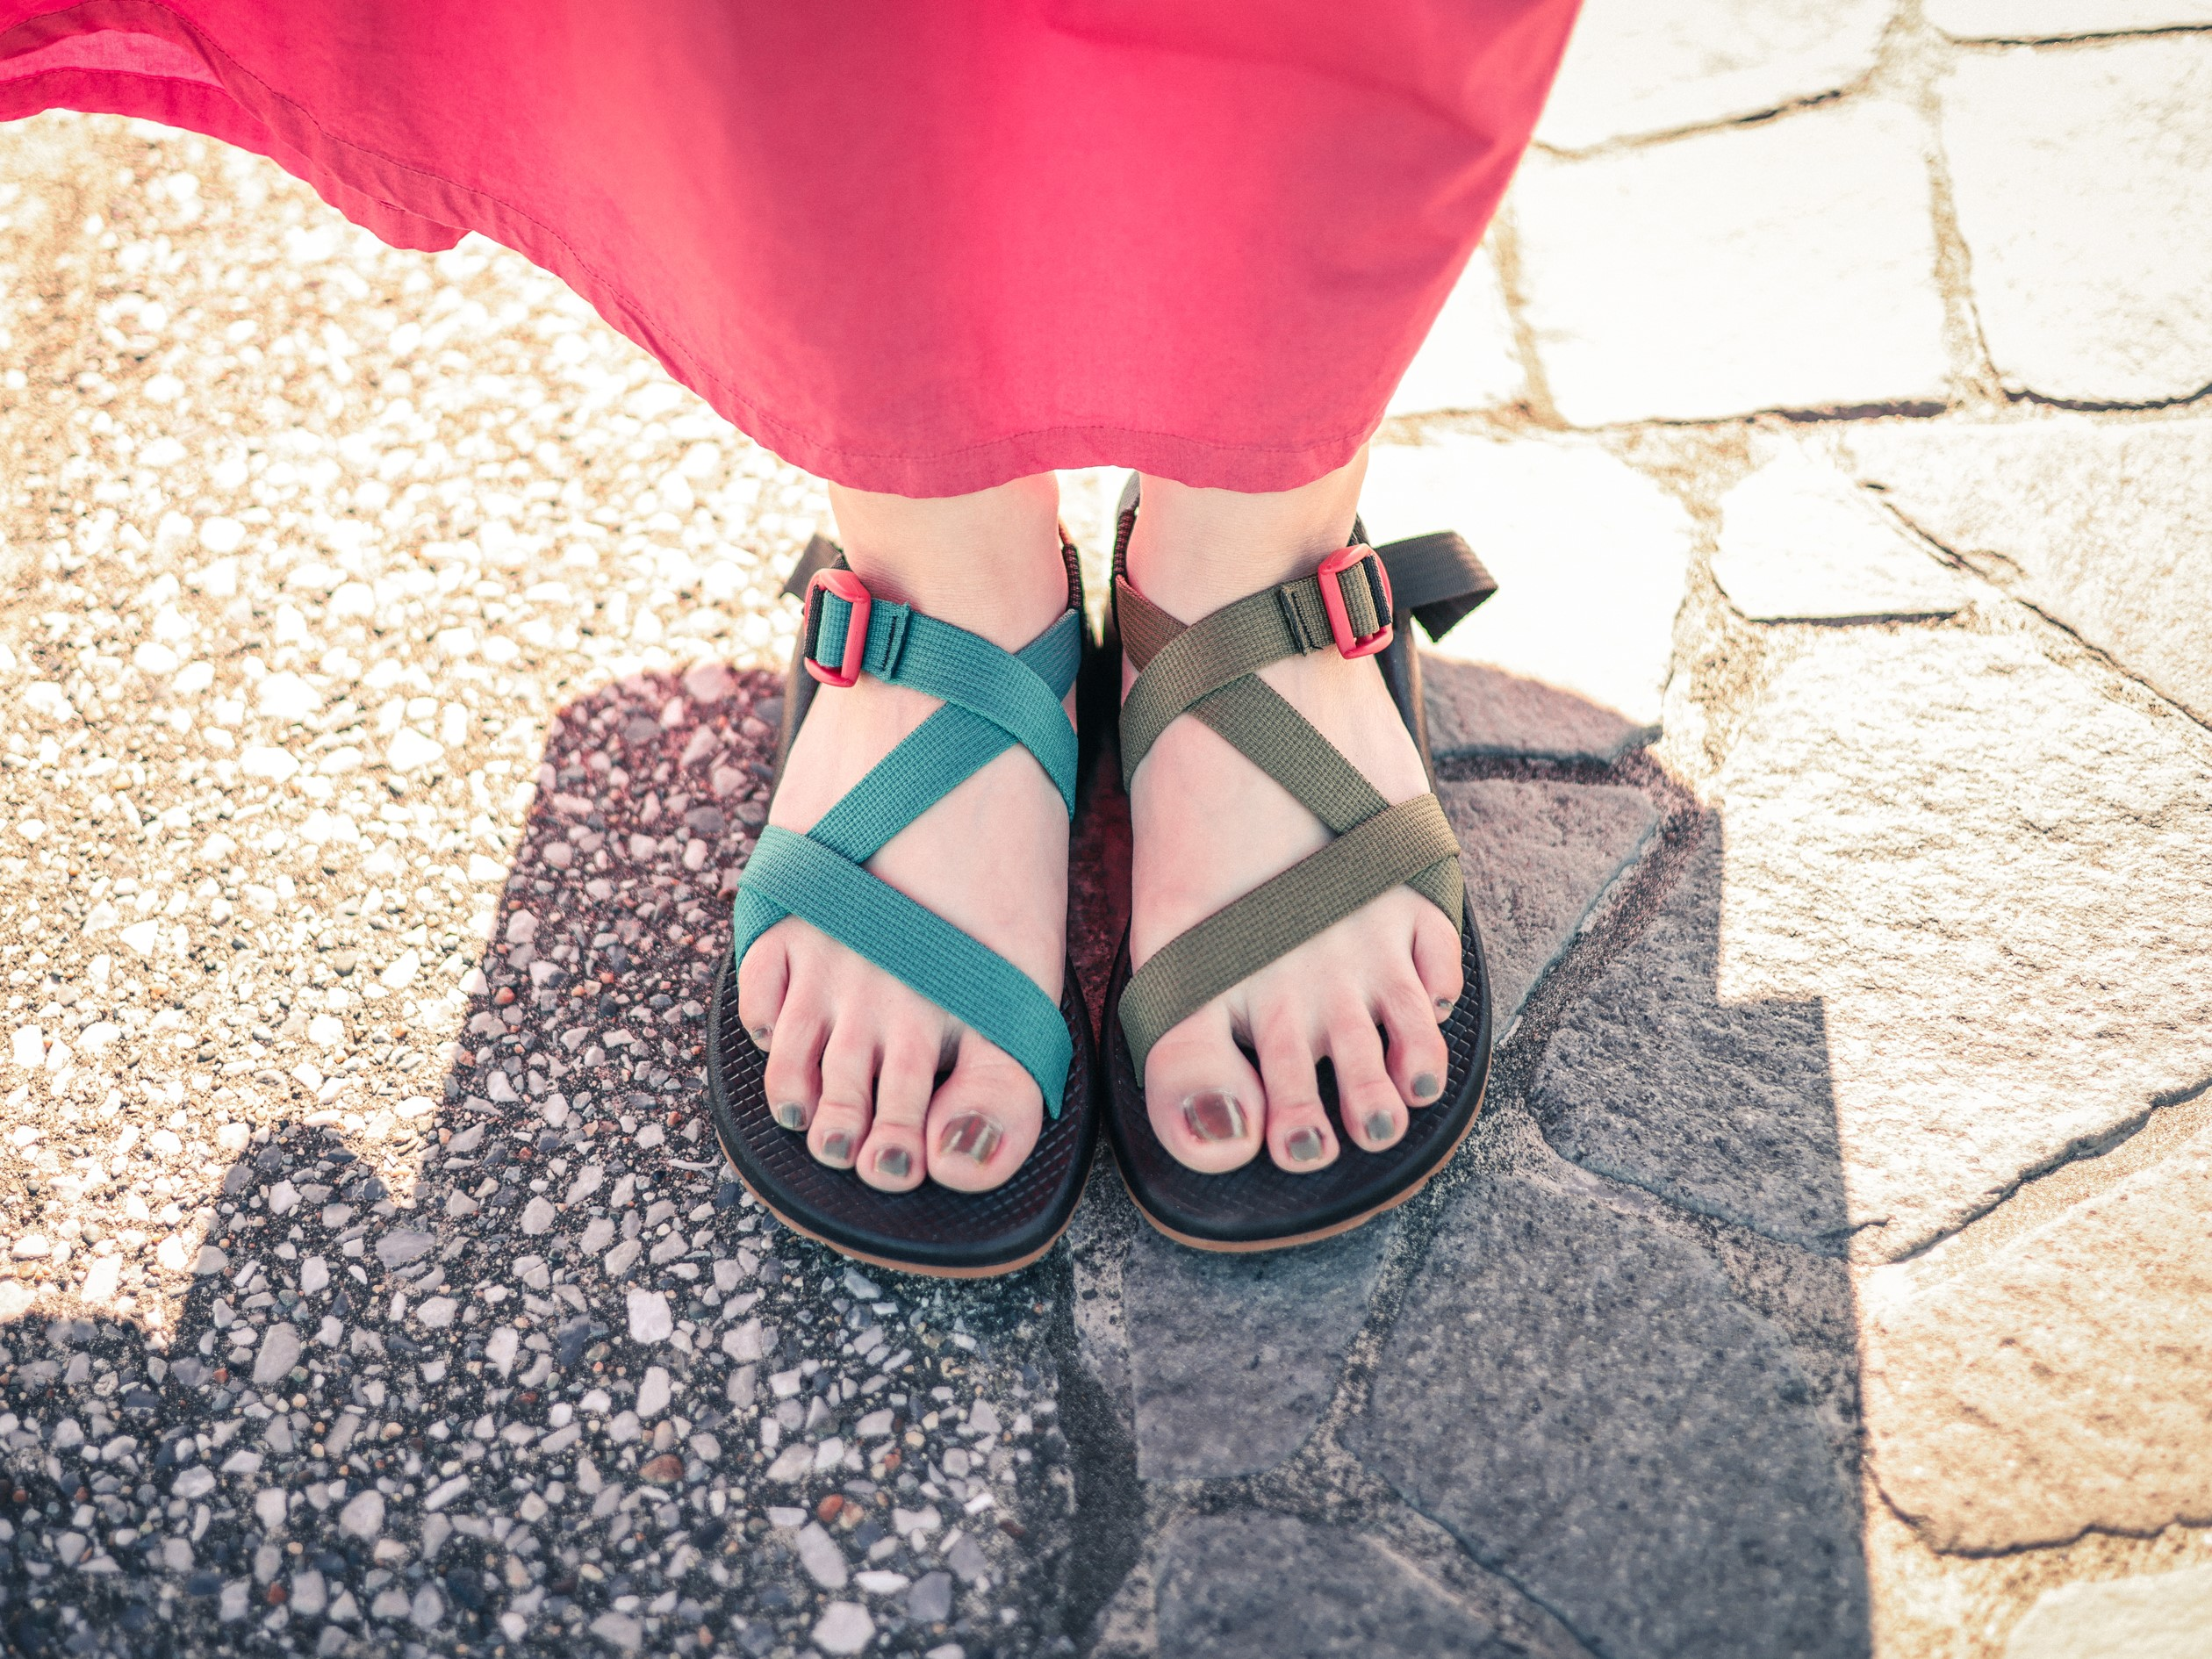 A&F COUNTRY Chaco Z1 클래식